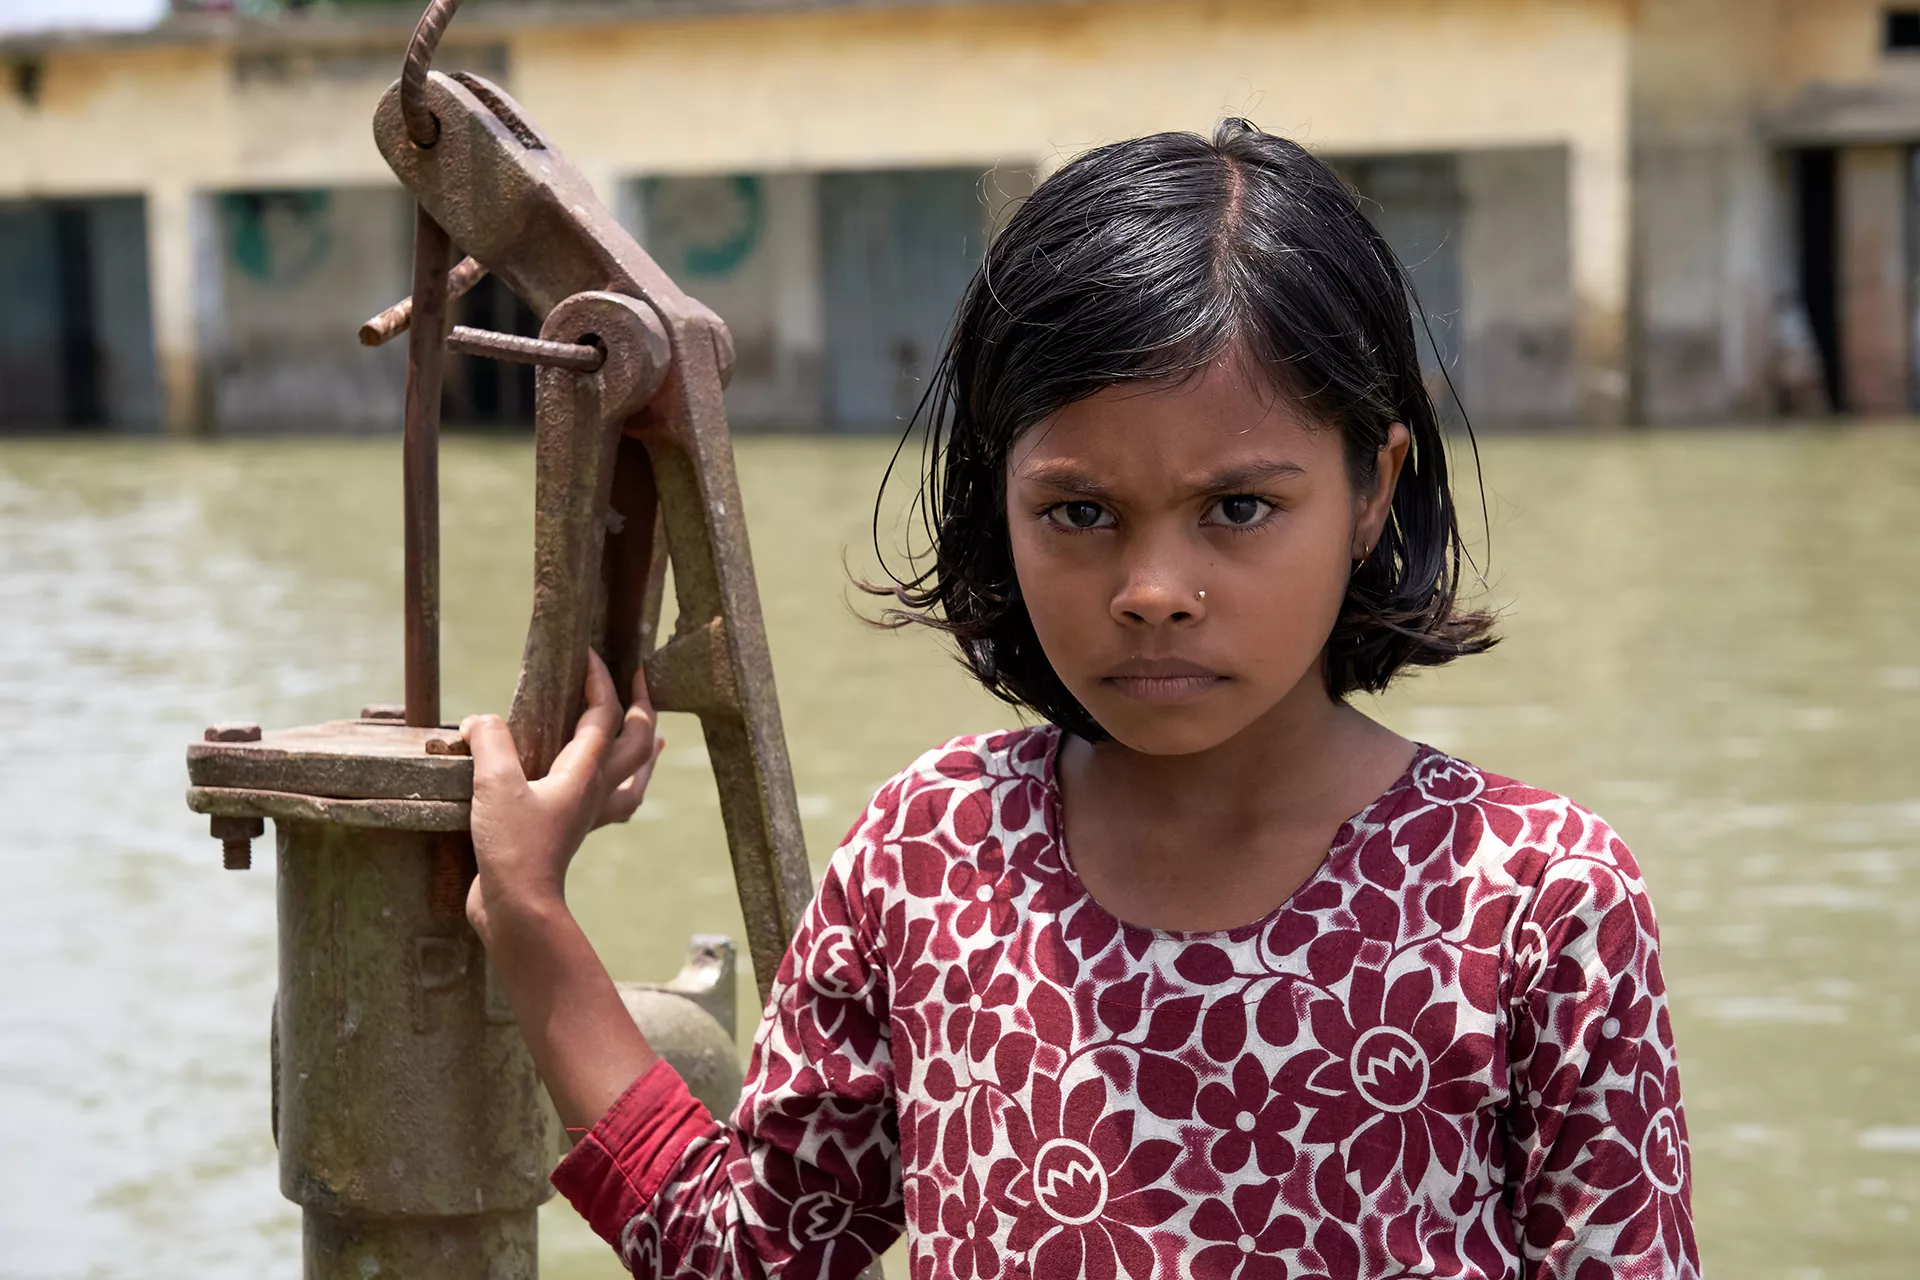 Ishrafi Khatun (10) stands in front of her school, Borobari Govt. Primary in Bangladesh, that has been submerged under water for the past few days due to severe flood.